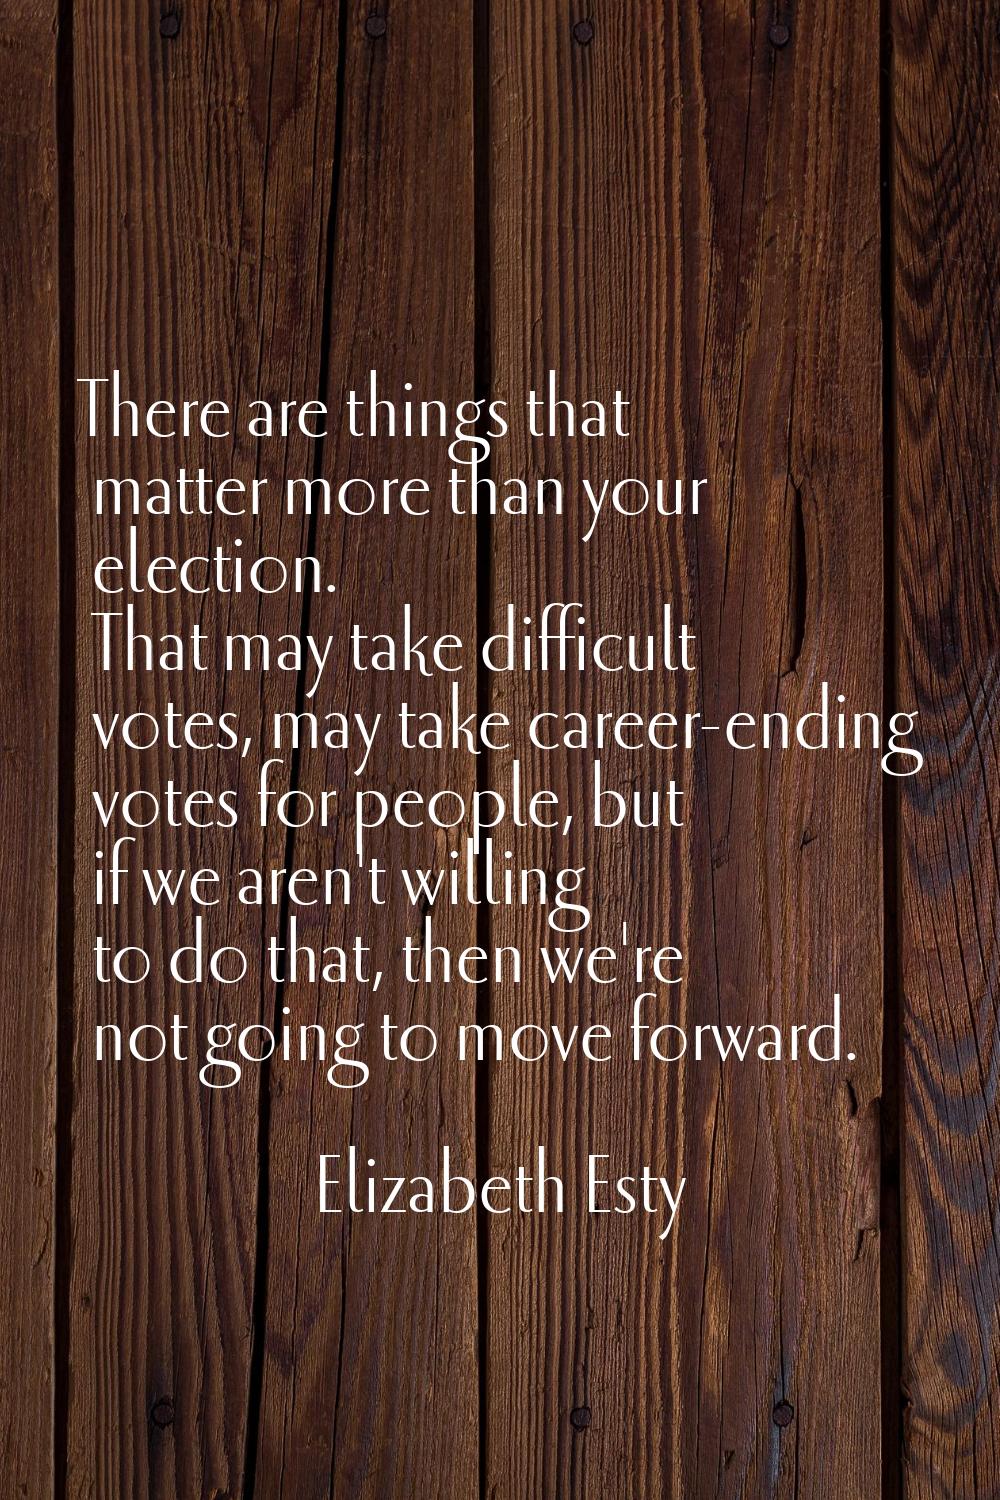 There are things that matter more than your election. That may take difficult votes, may take caree